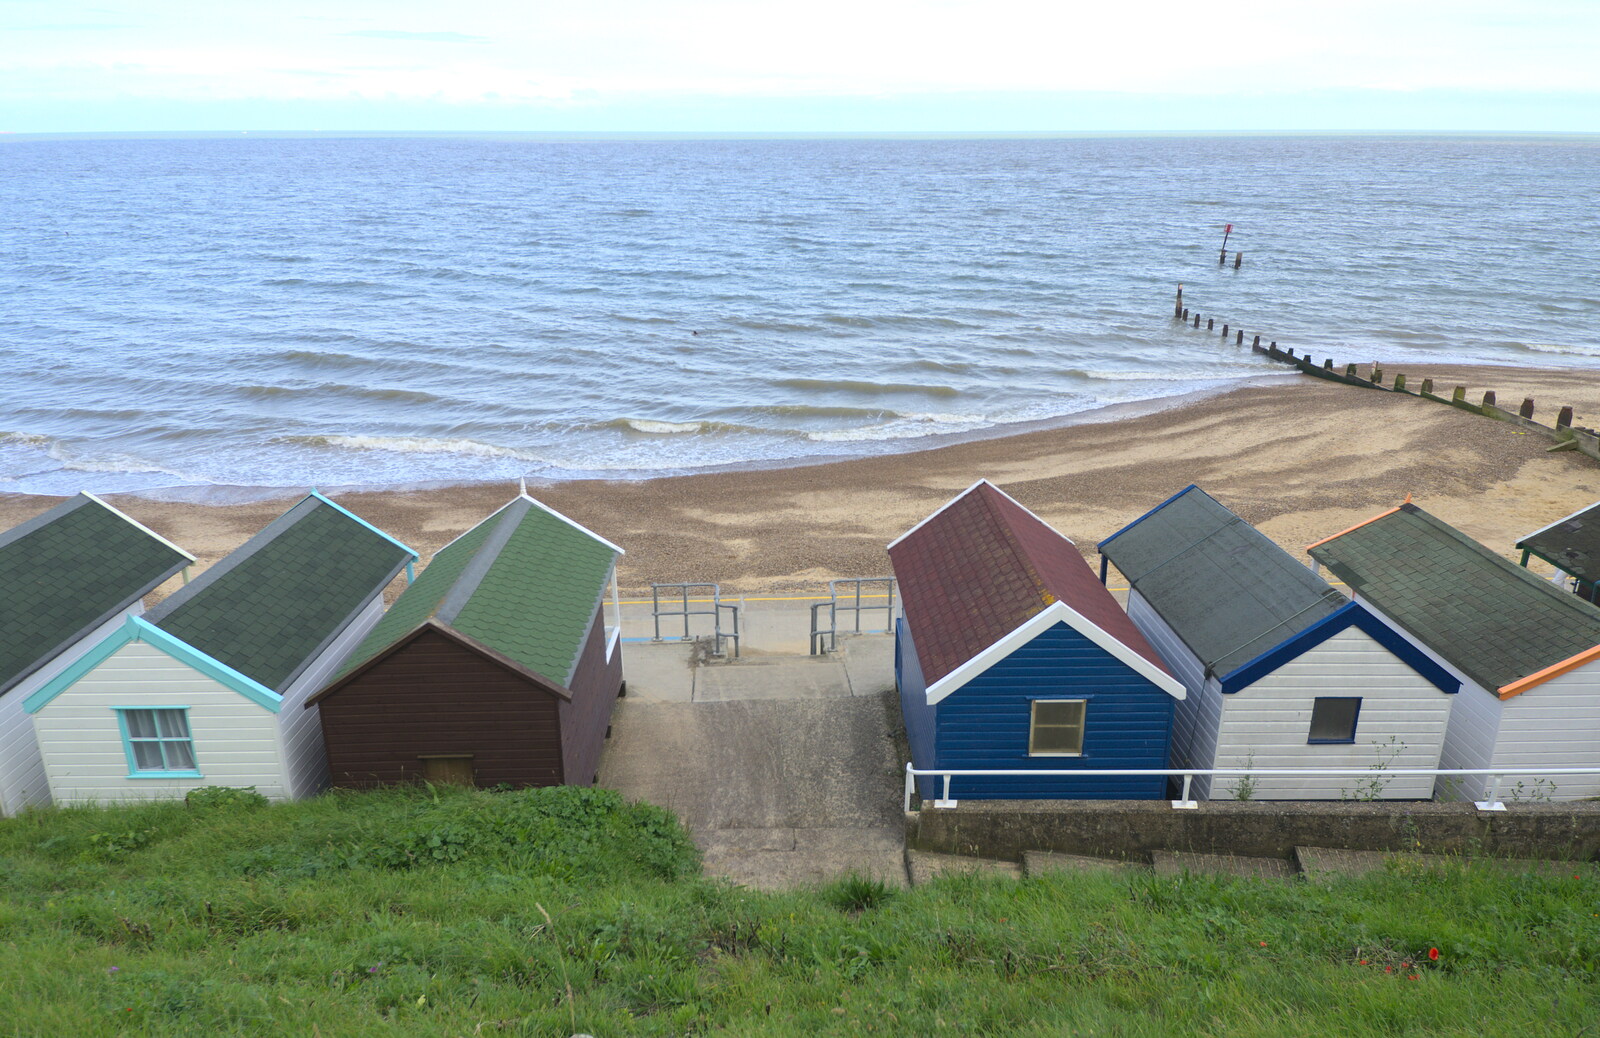 Southwold beach huts from The RSPB Charity Bike Ride, Little Glemham, Suffolk - 5th August 2012